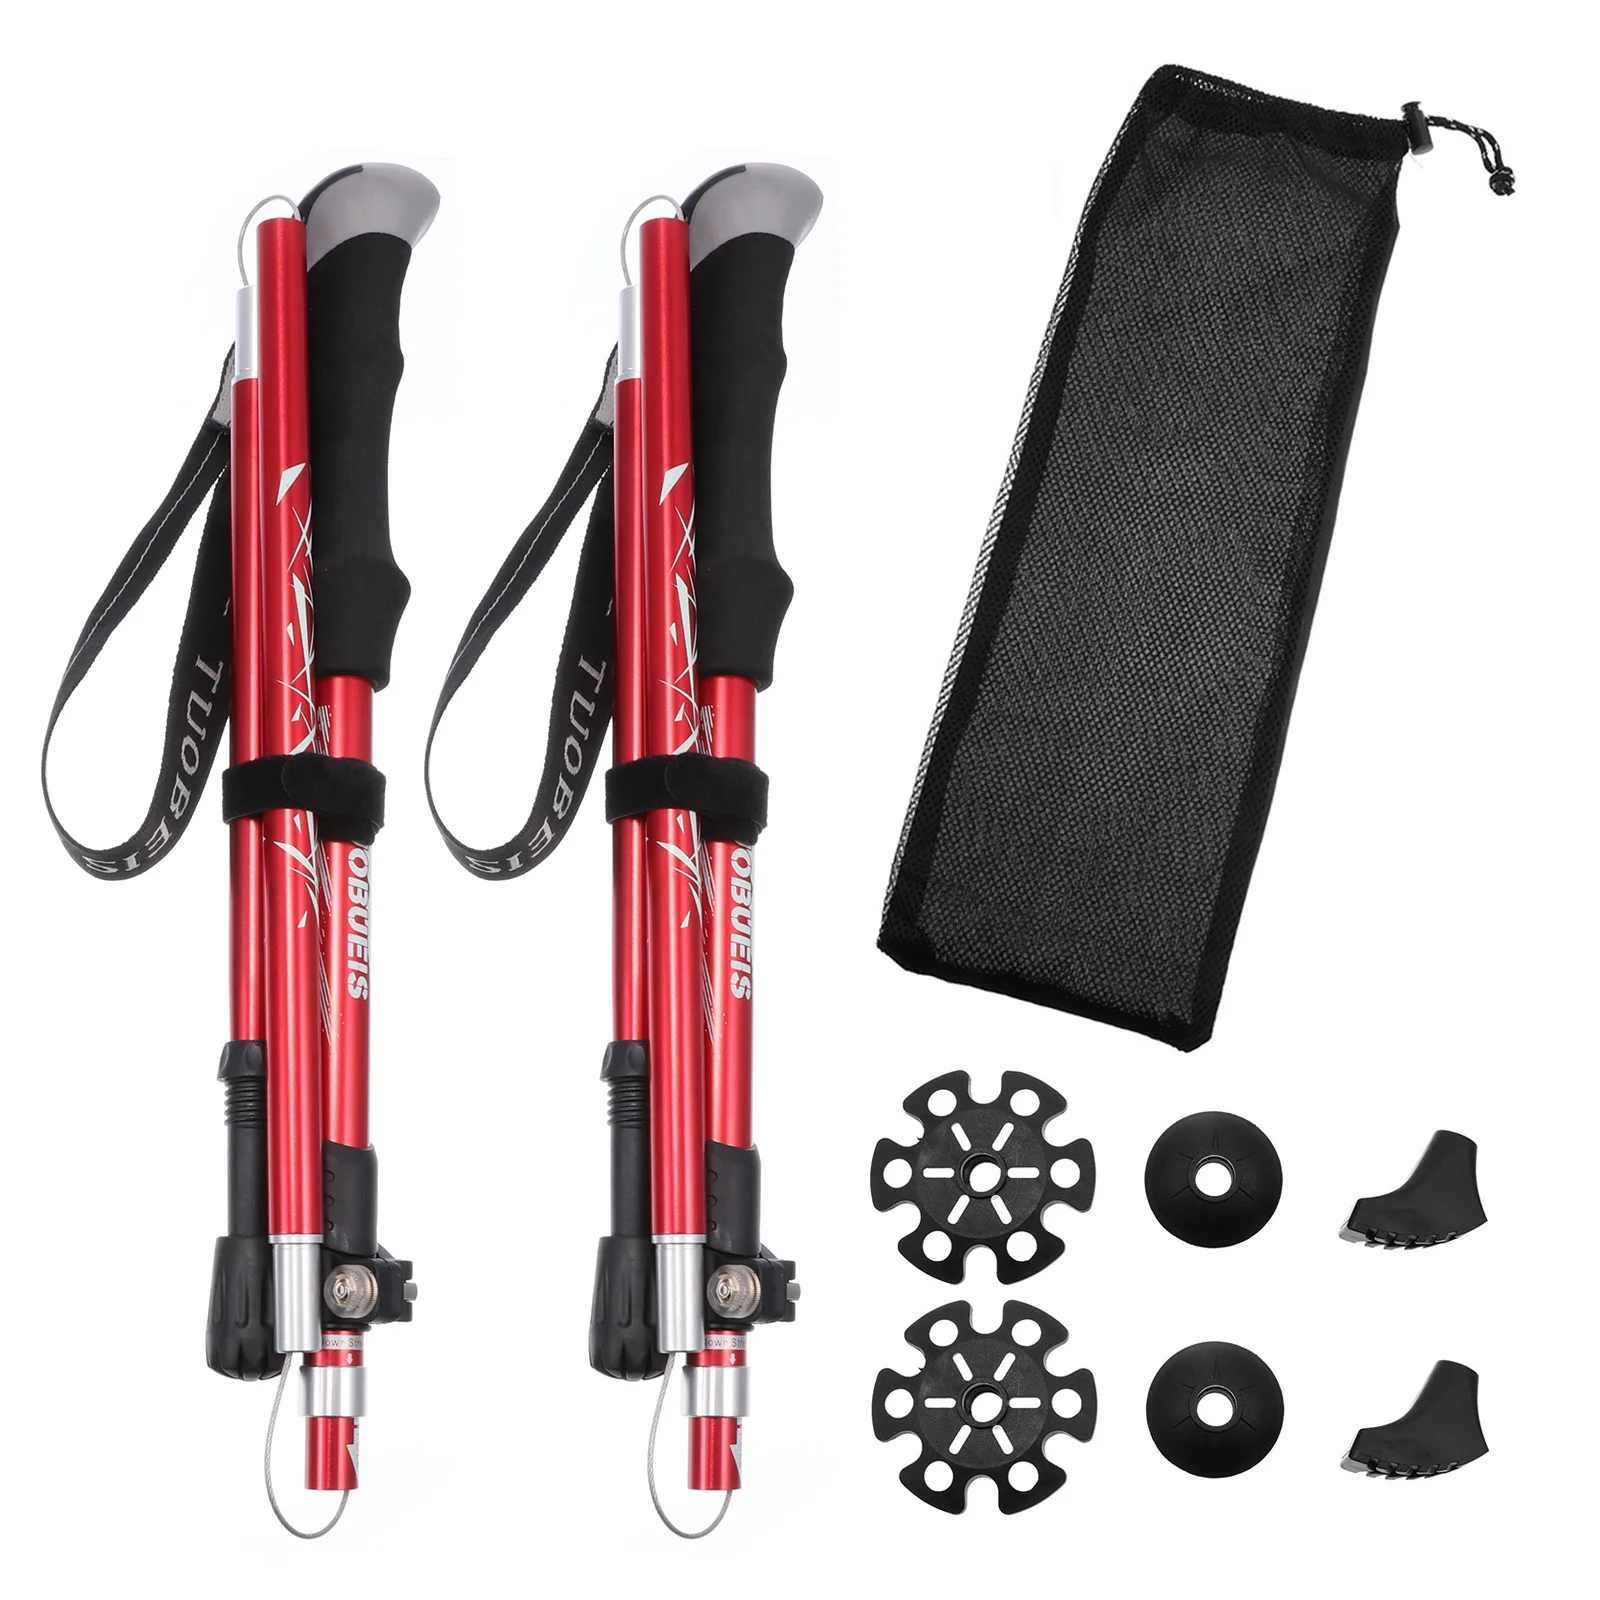 

1 Pairs Trekking Poles Folded Aluminum Alloy Collapsible With Storage Bag Hiking Poles Adjustable Quick Lock For Hiking Outdoor